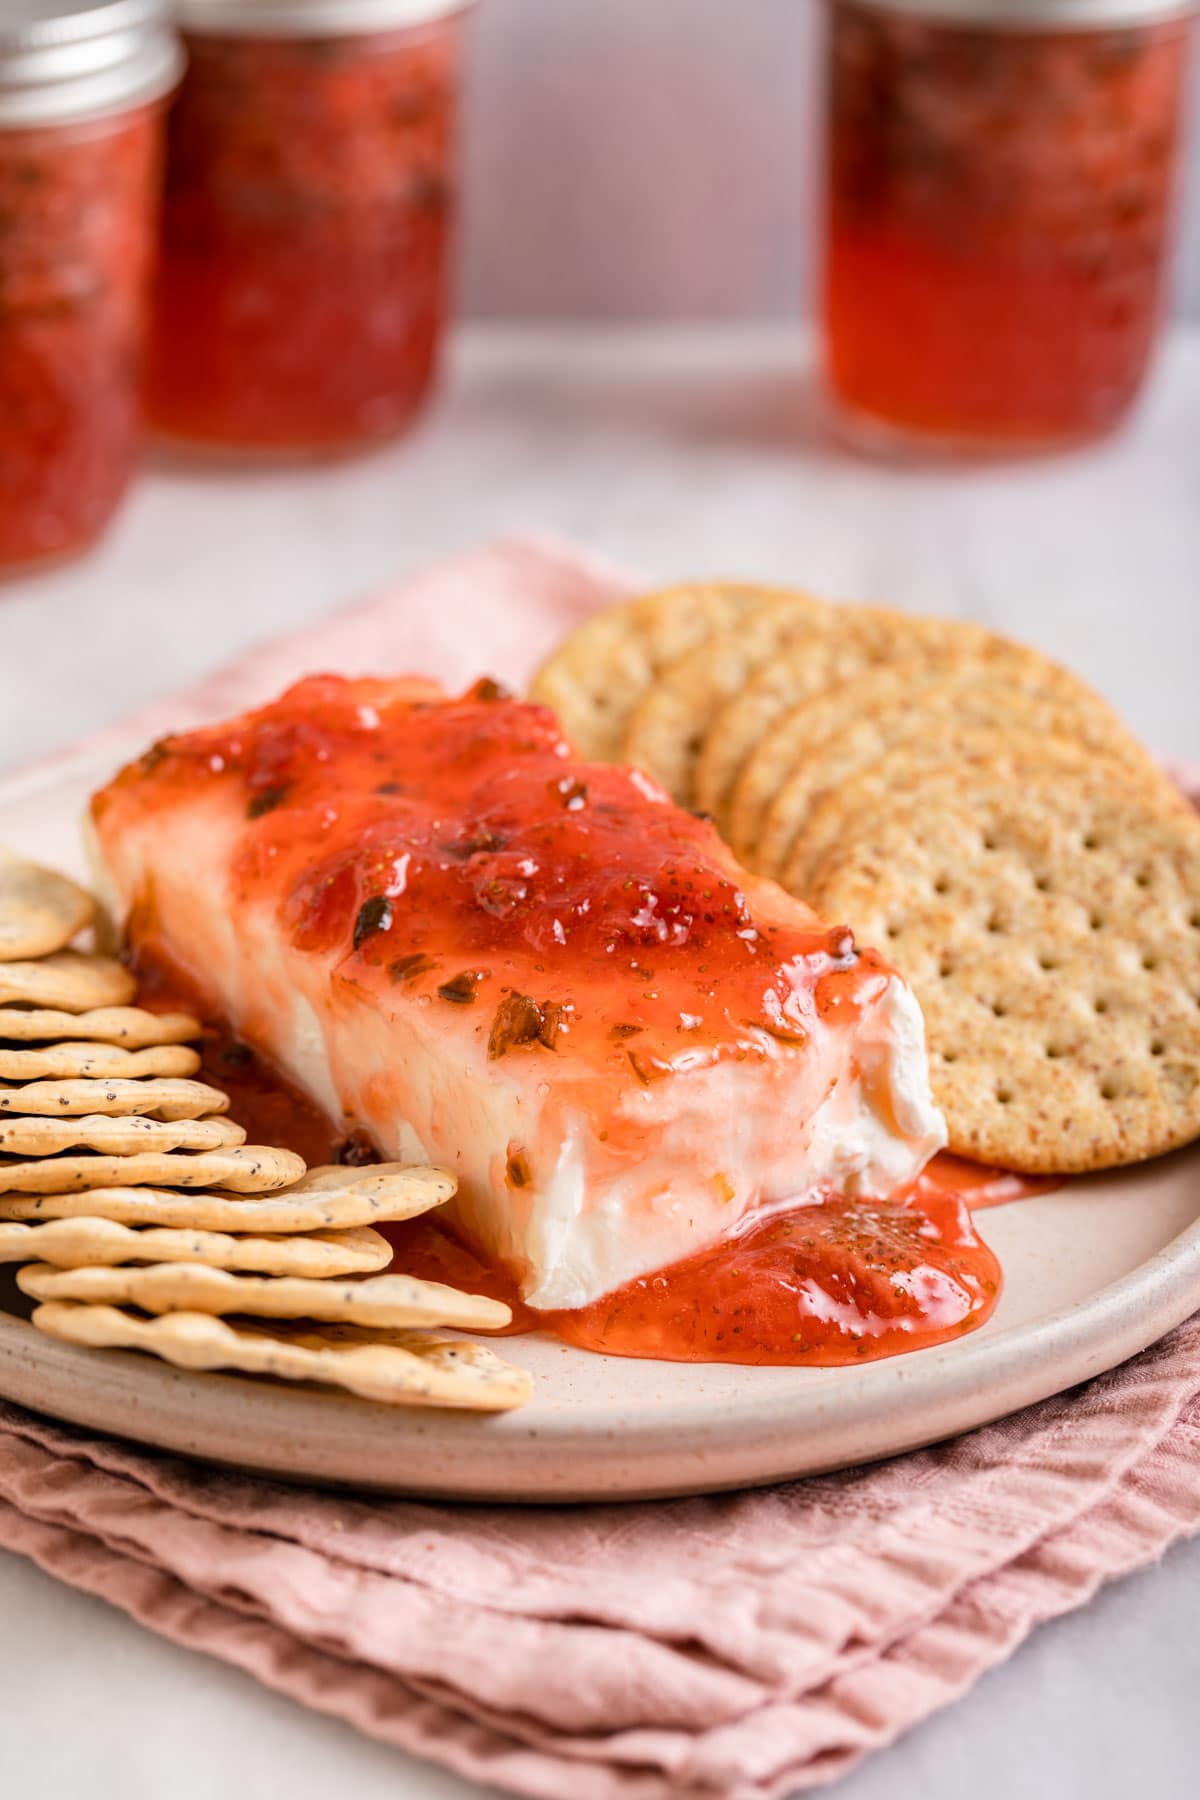 Strawberry Jalapeno Jam poured on block of cream cheese with round crackers on plate with jam jars in background